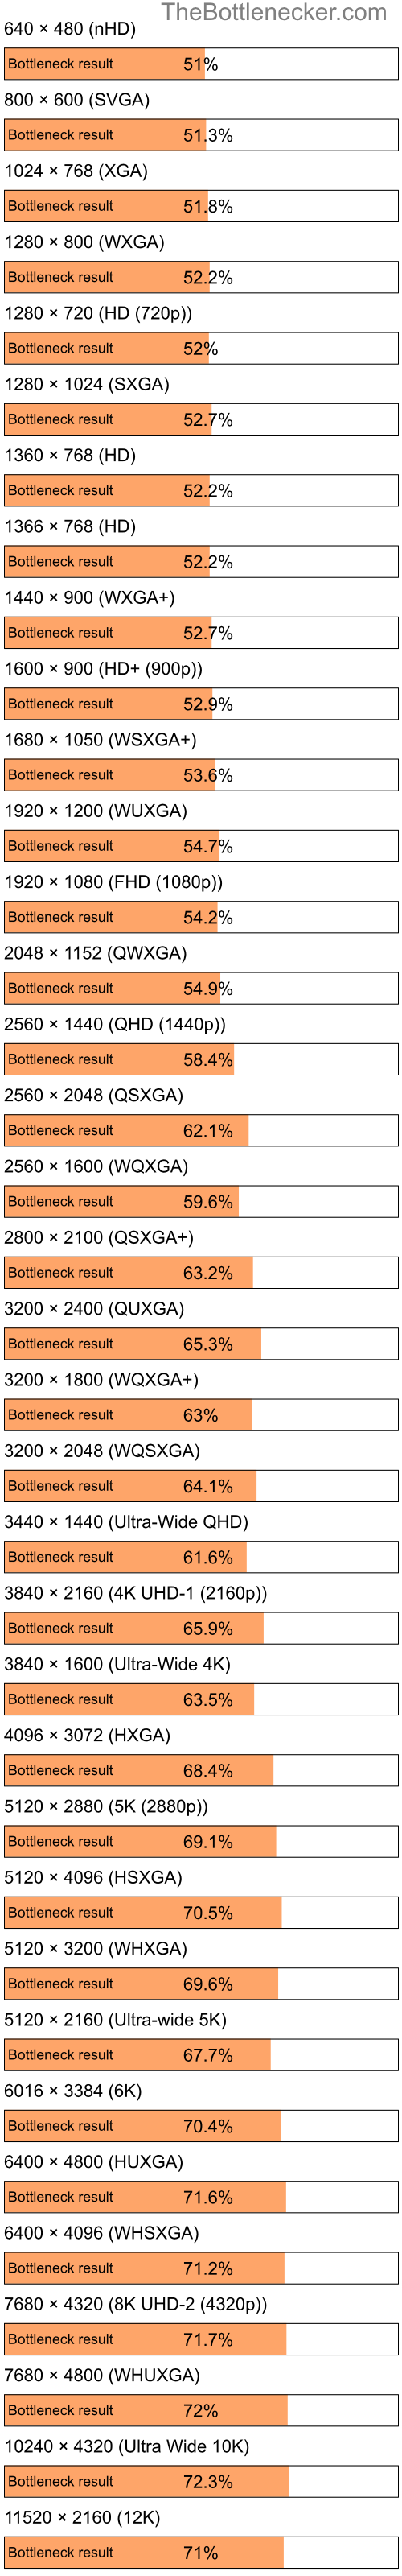 Bottleneck results by resolution for Intel Celeron and AMD M880G with Mobility Radeon HD 4200 in Processor Intense Tasks